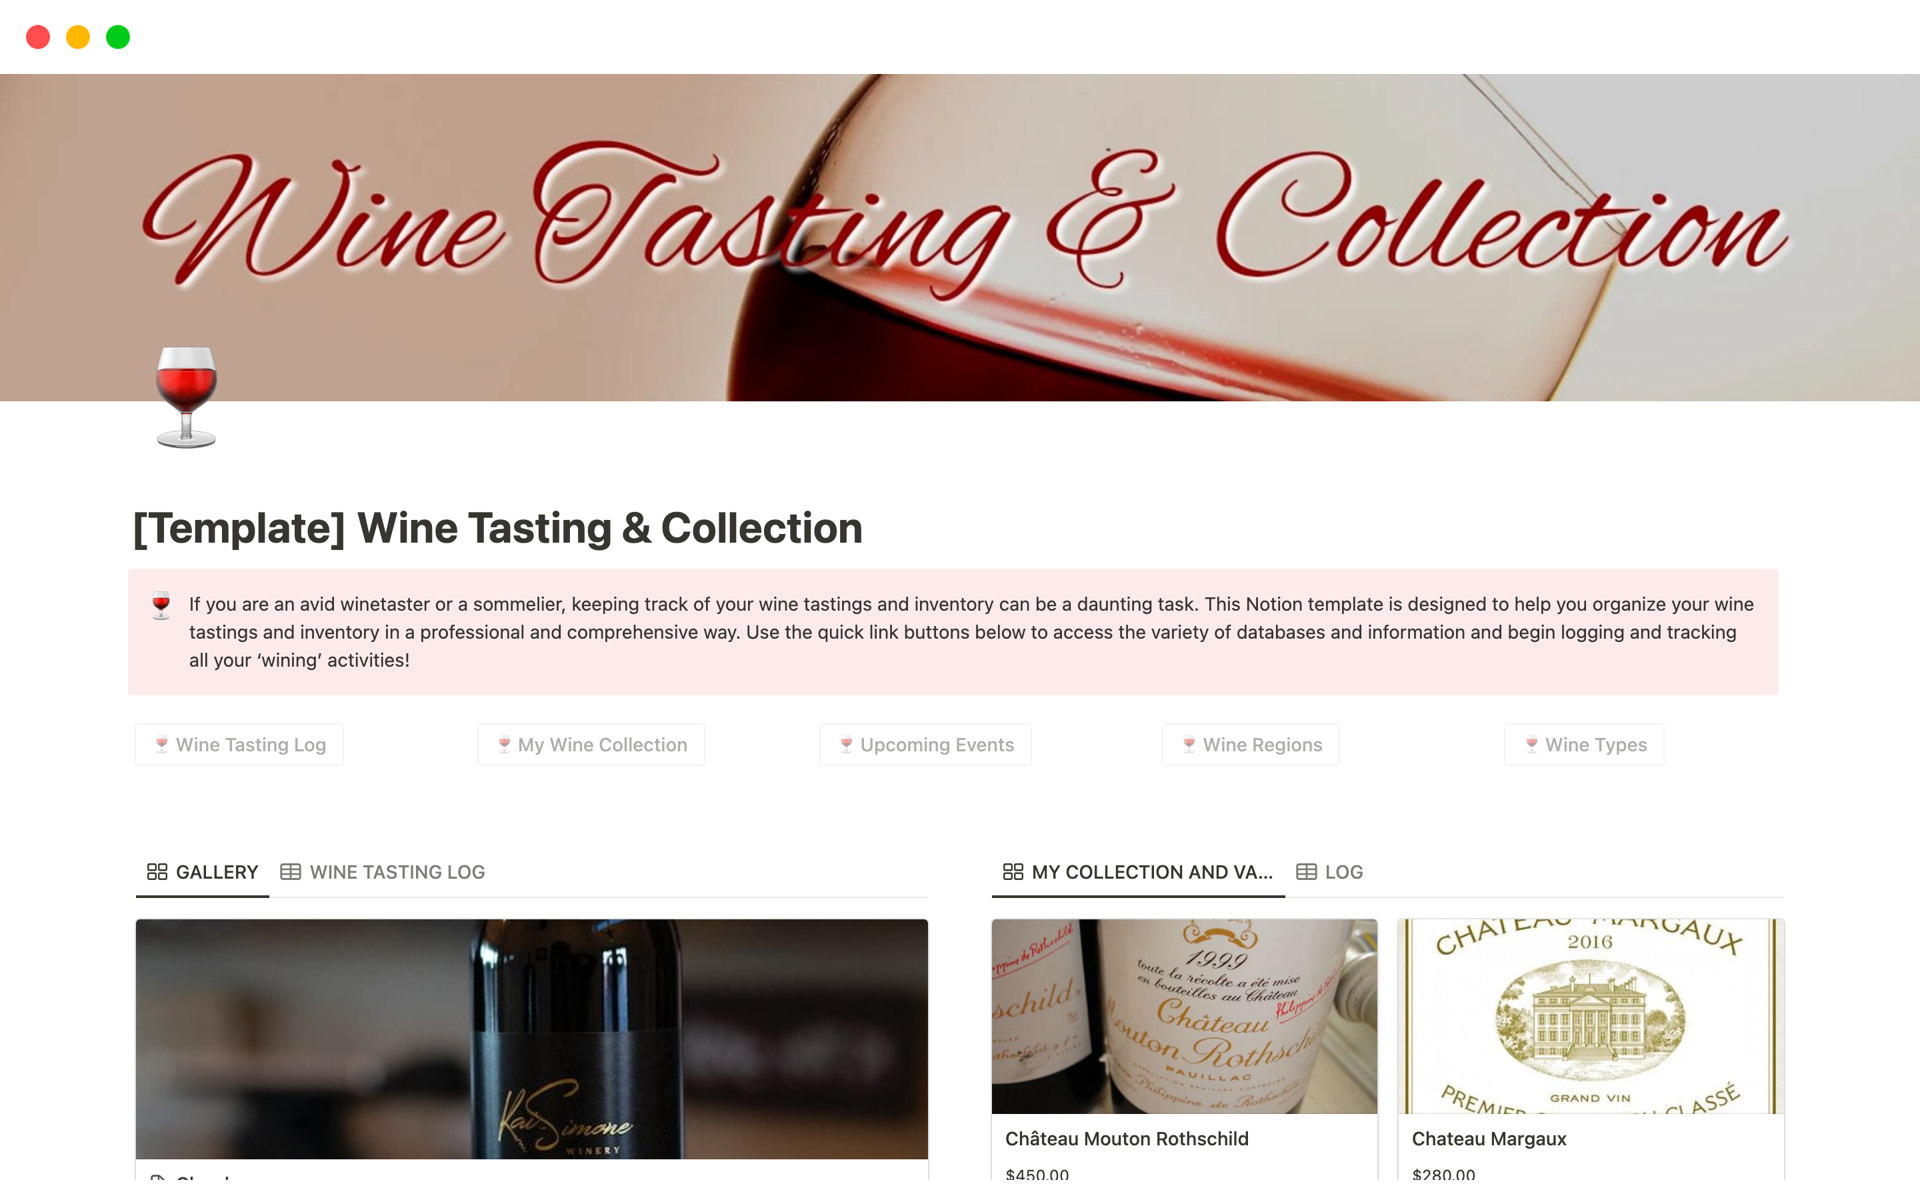 Fully comprehensive wine tasting, wine collection and wine events planning Notion Template